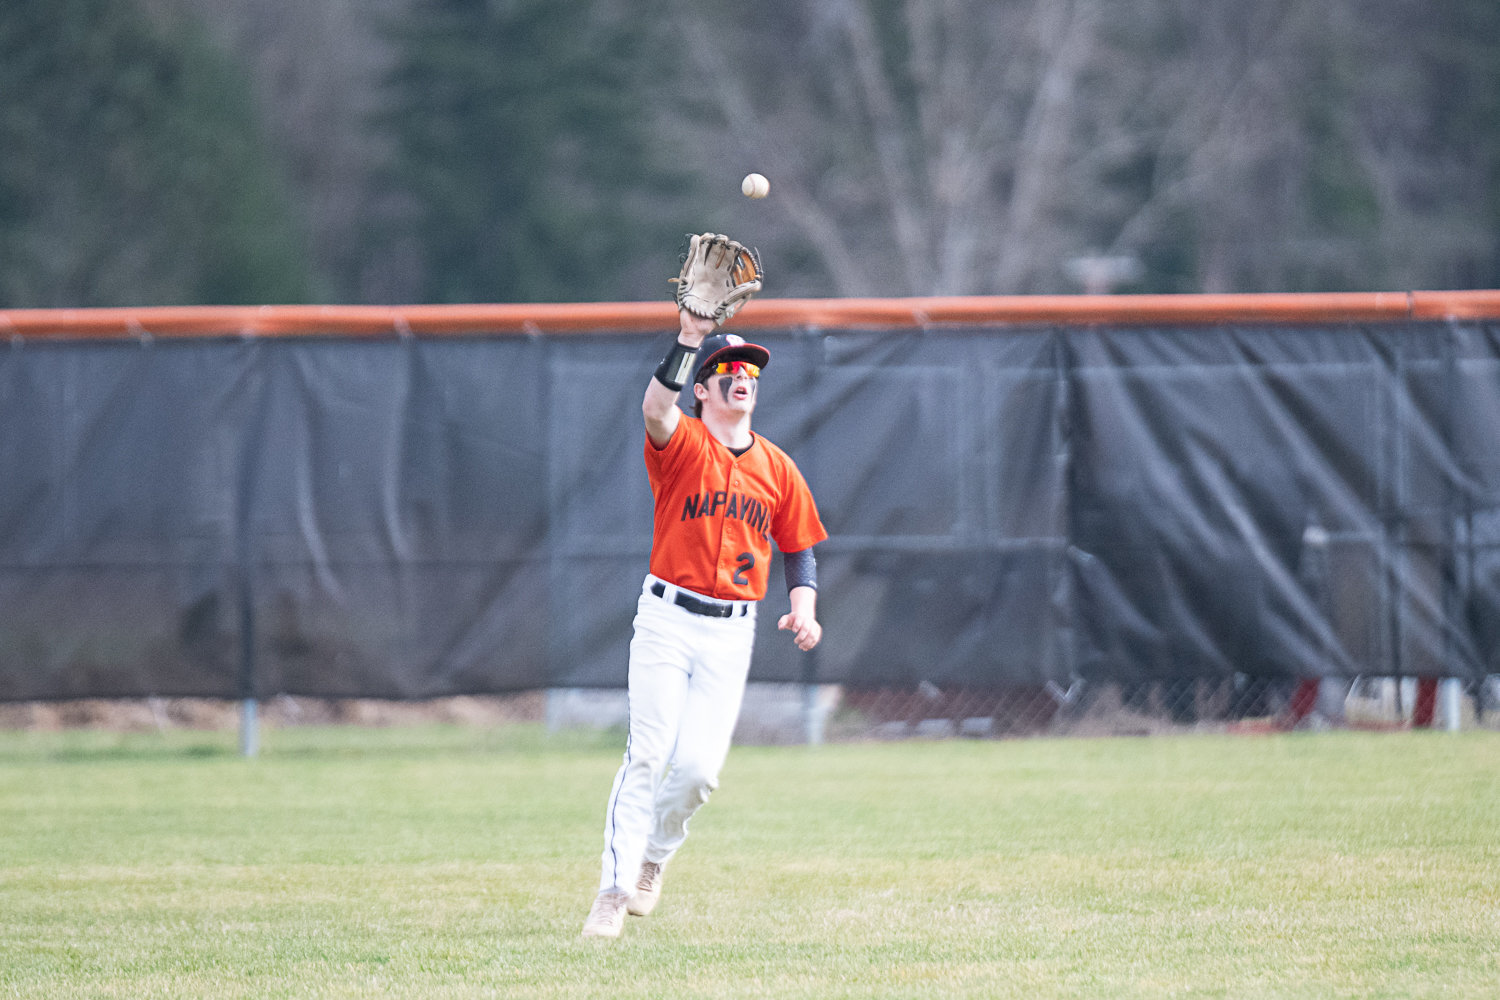 Austin Chapman gets under a ball during Napavine's 4-1 loss to Toledo on March 20.